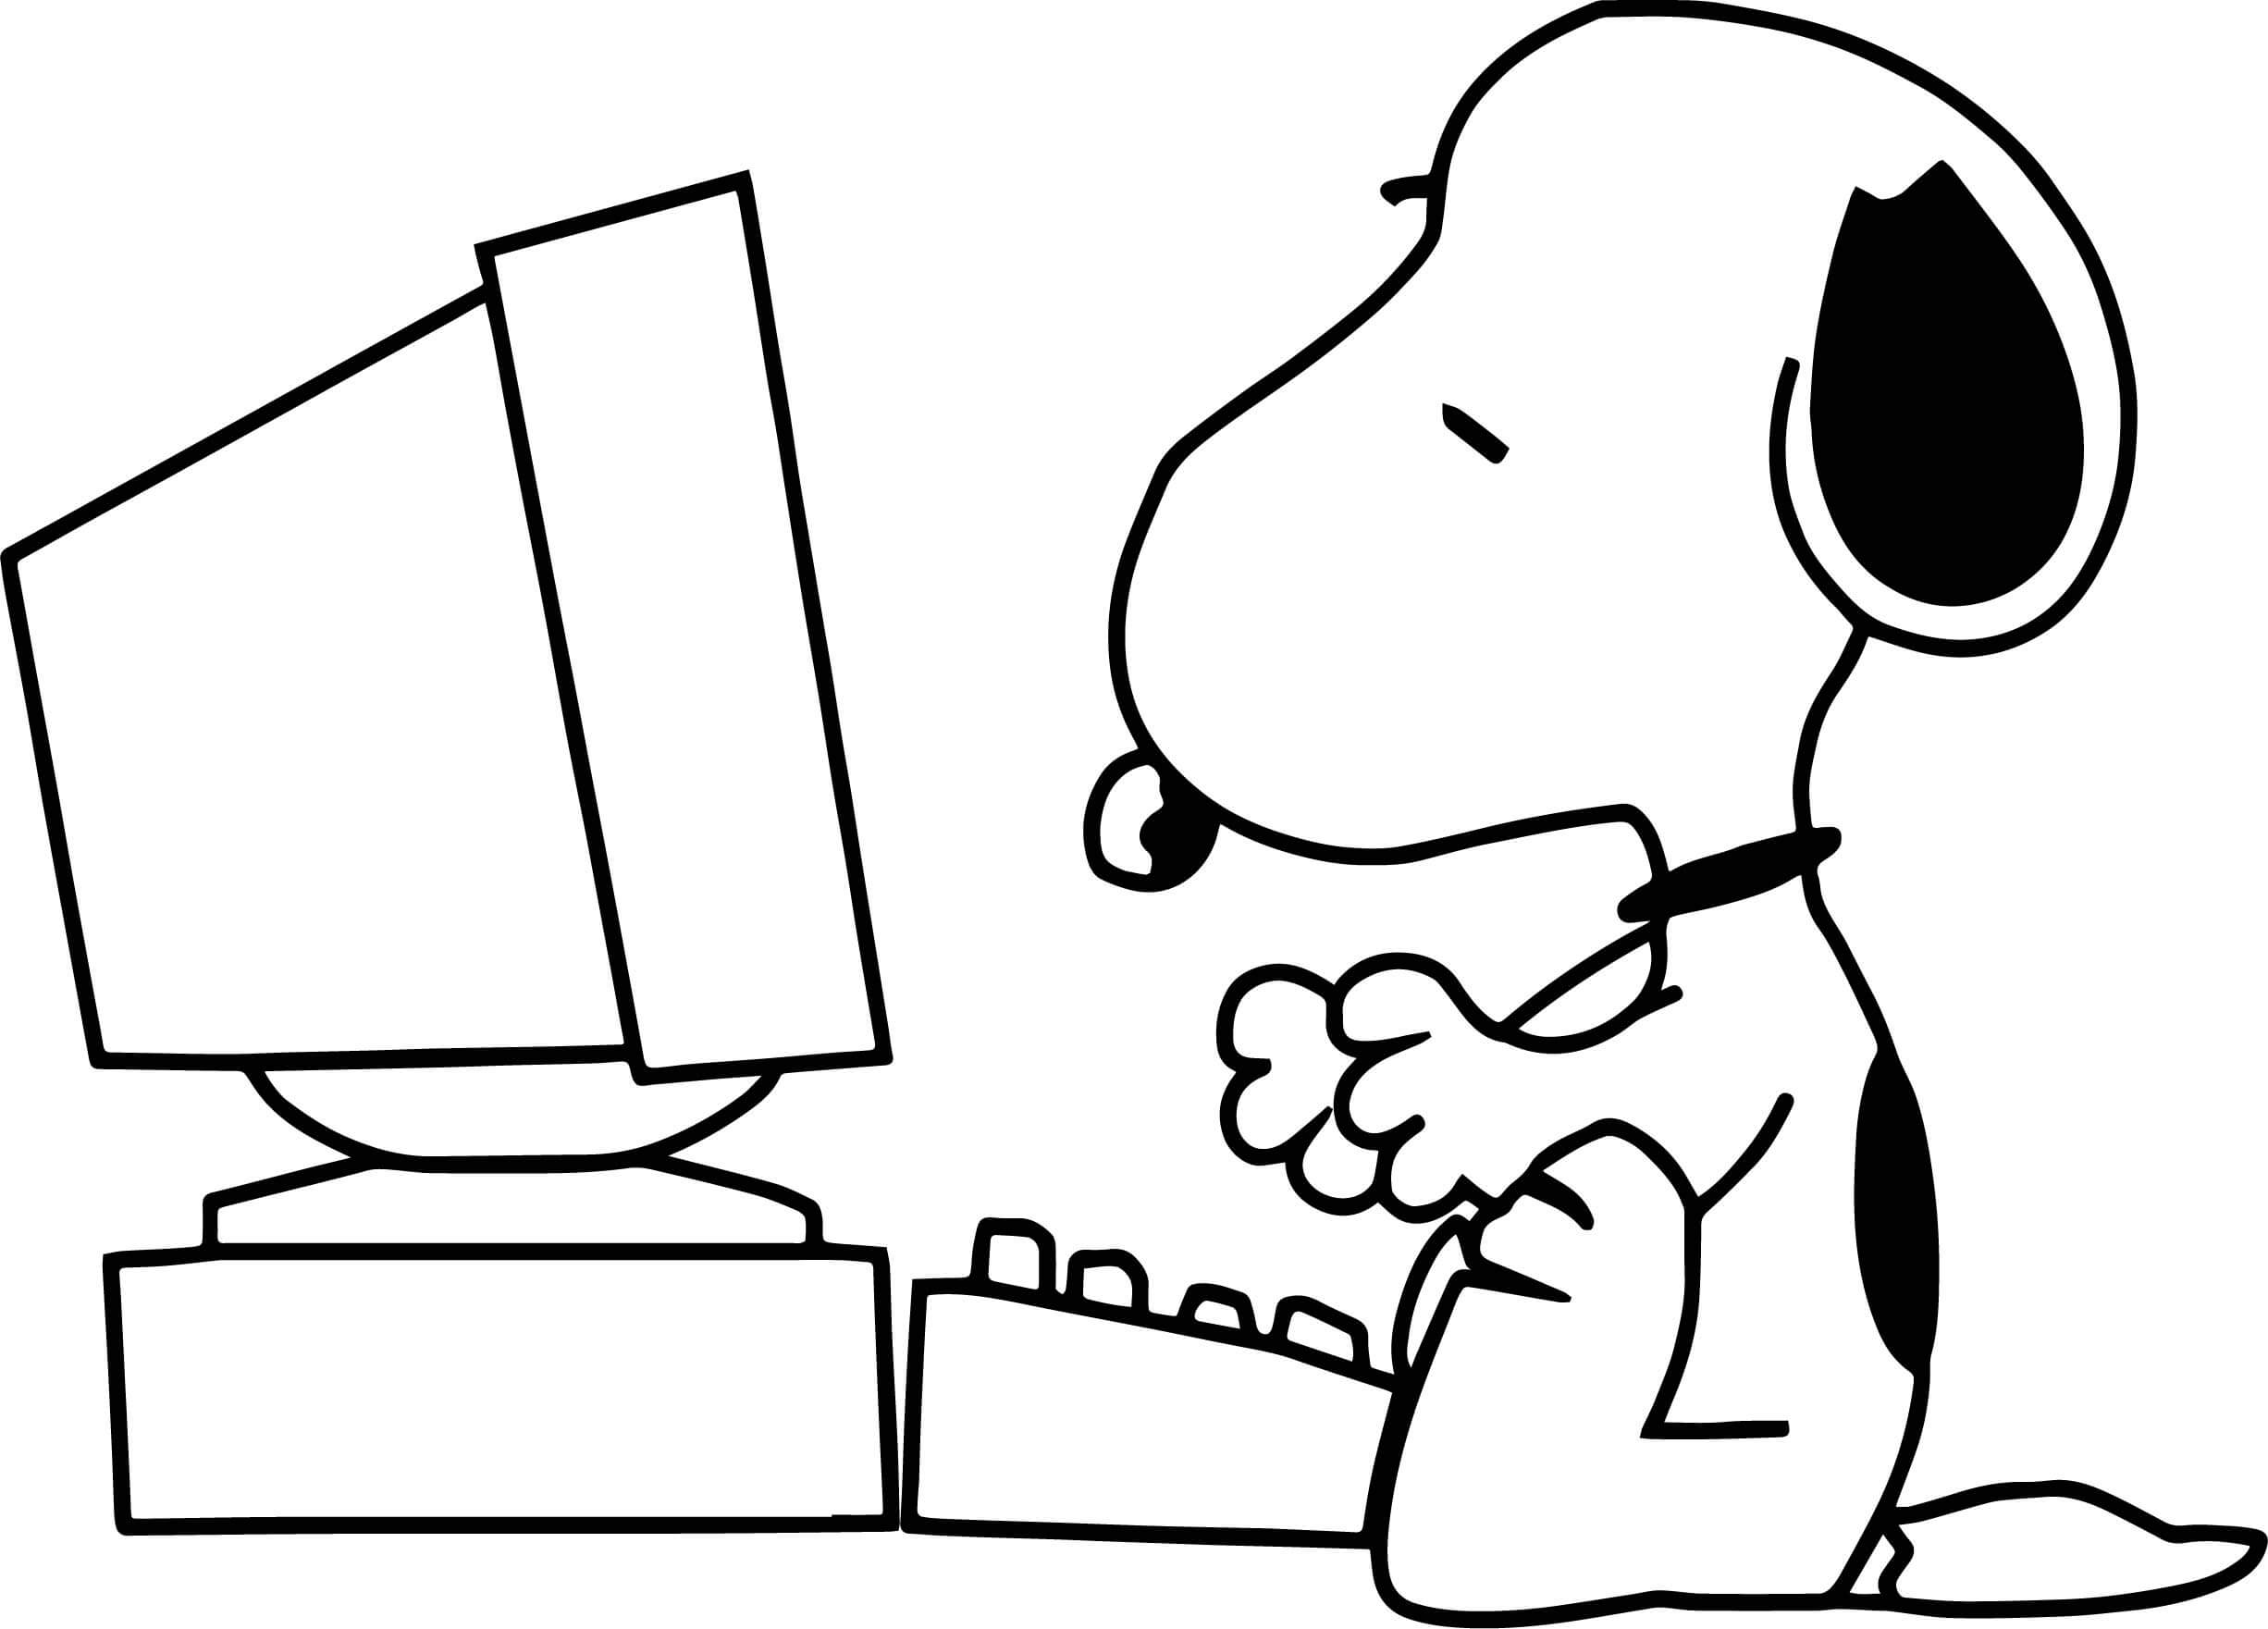 Snoopy on the Computer Coloring Page